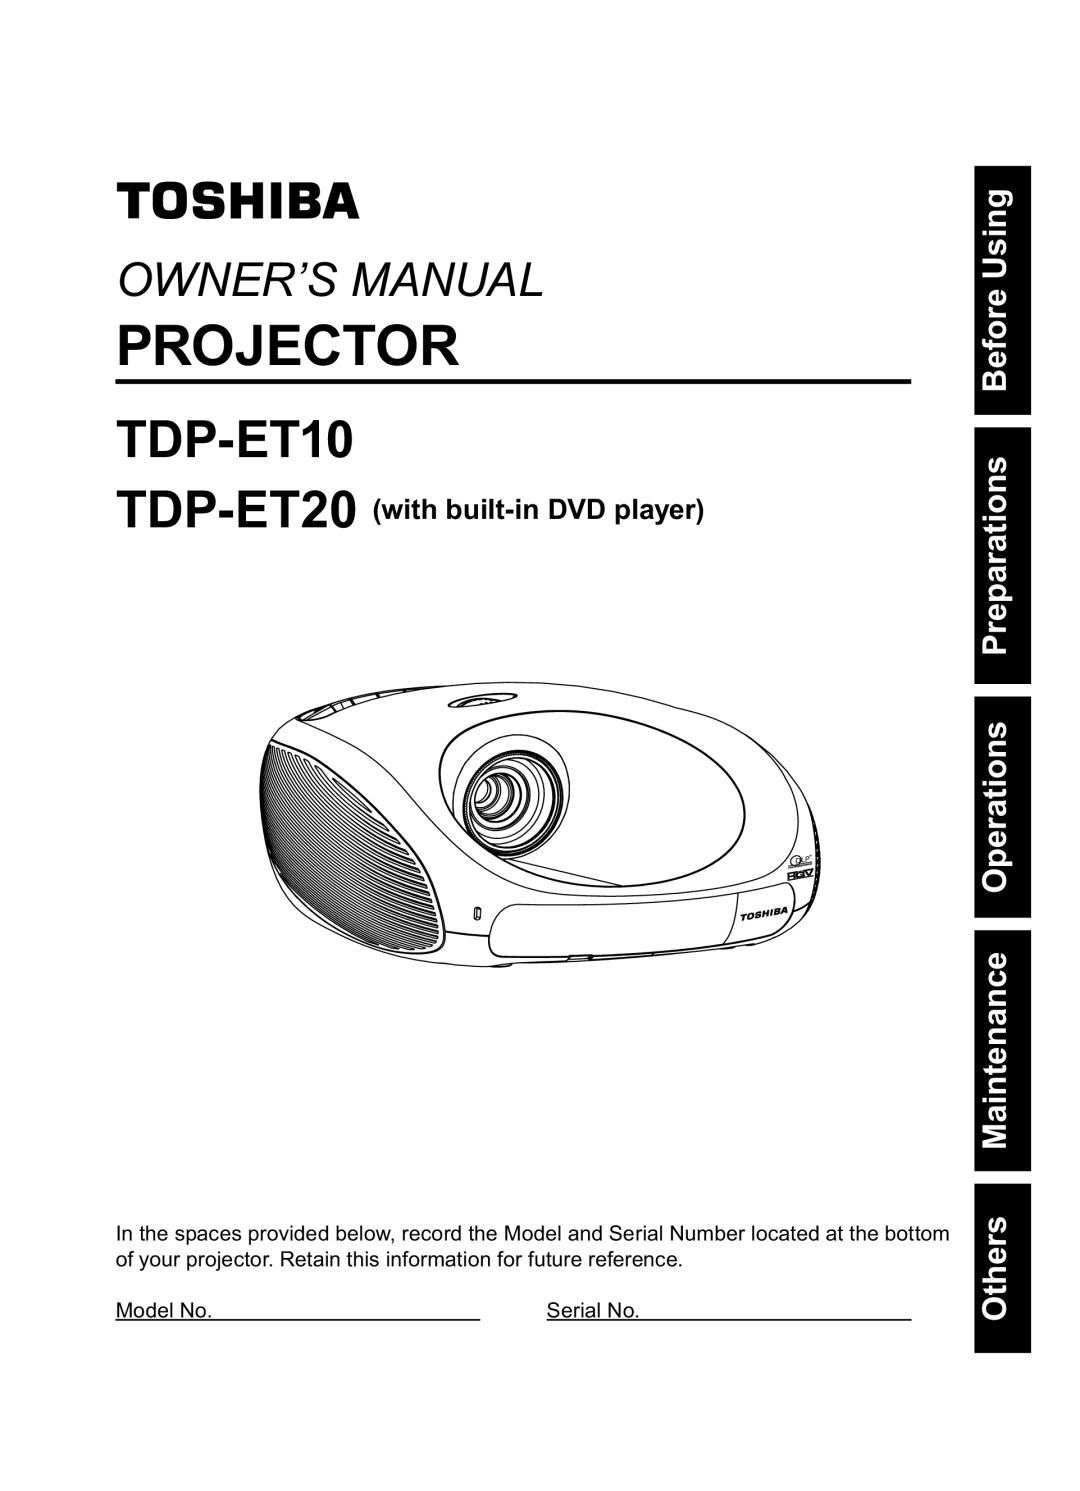 Toshiba TDP-ET10 owner manual Others Maintenance Operations Preparations Before Using, TDP-ET20 with built-in DVD player 